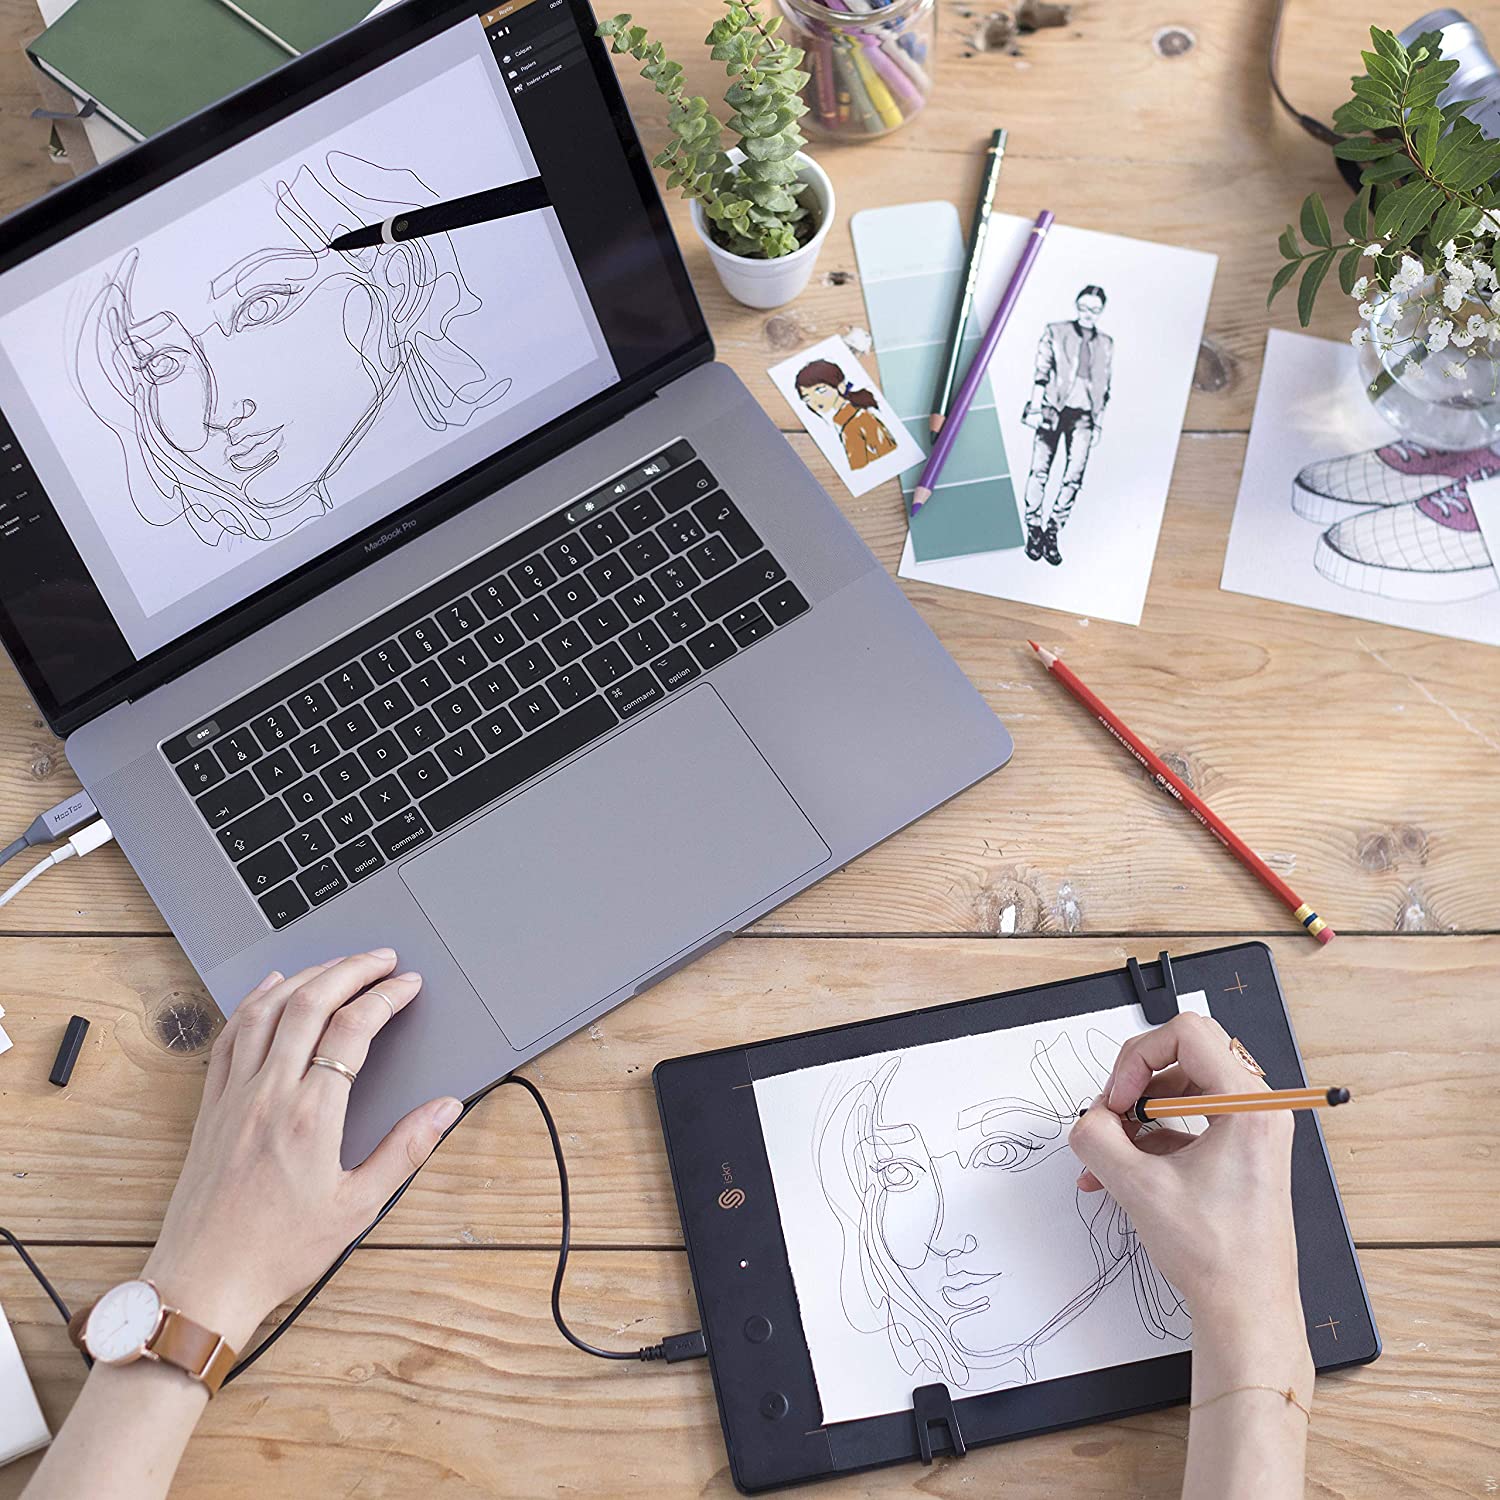 ISKN - The Slate 2+ Tablet for Digitizing Notes Digital Drawing Pad